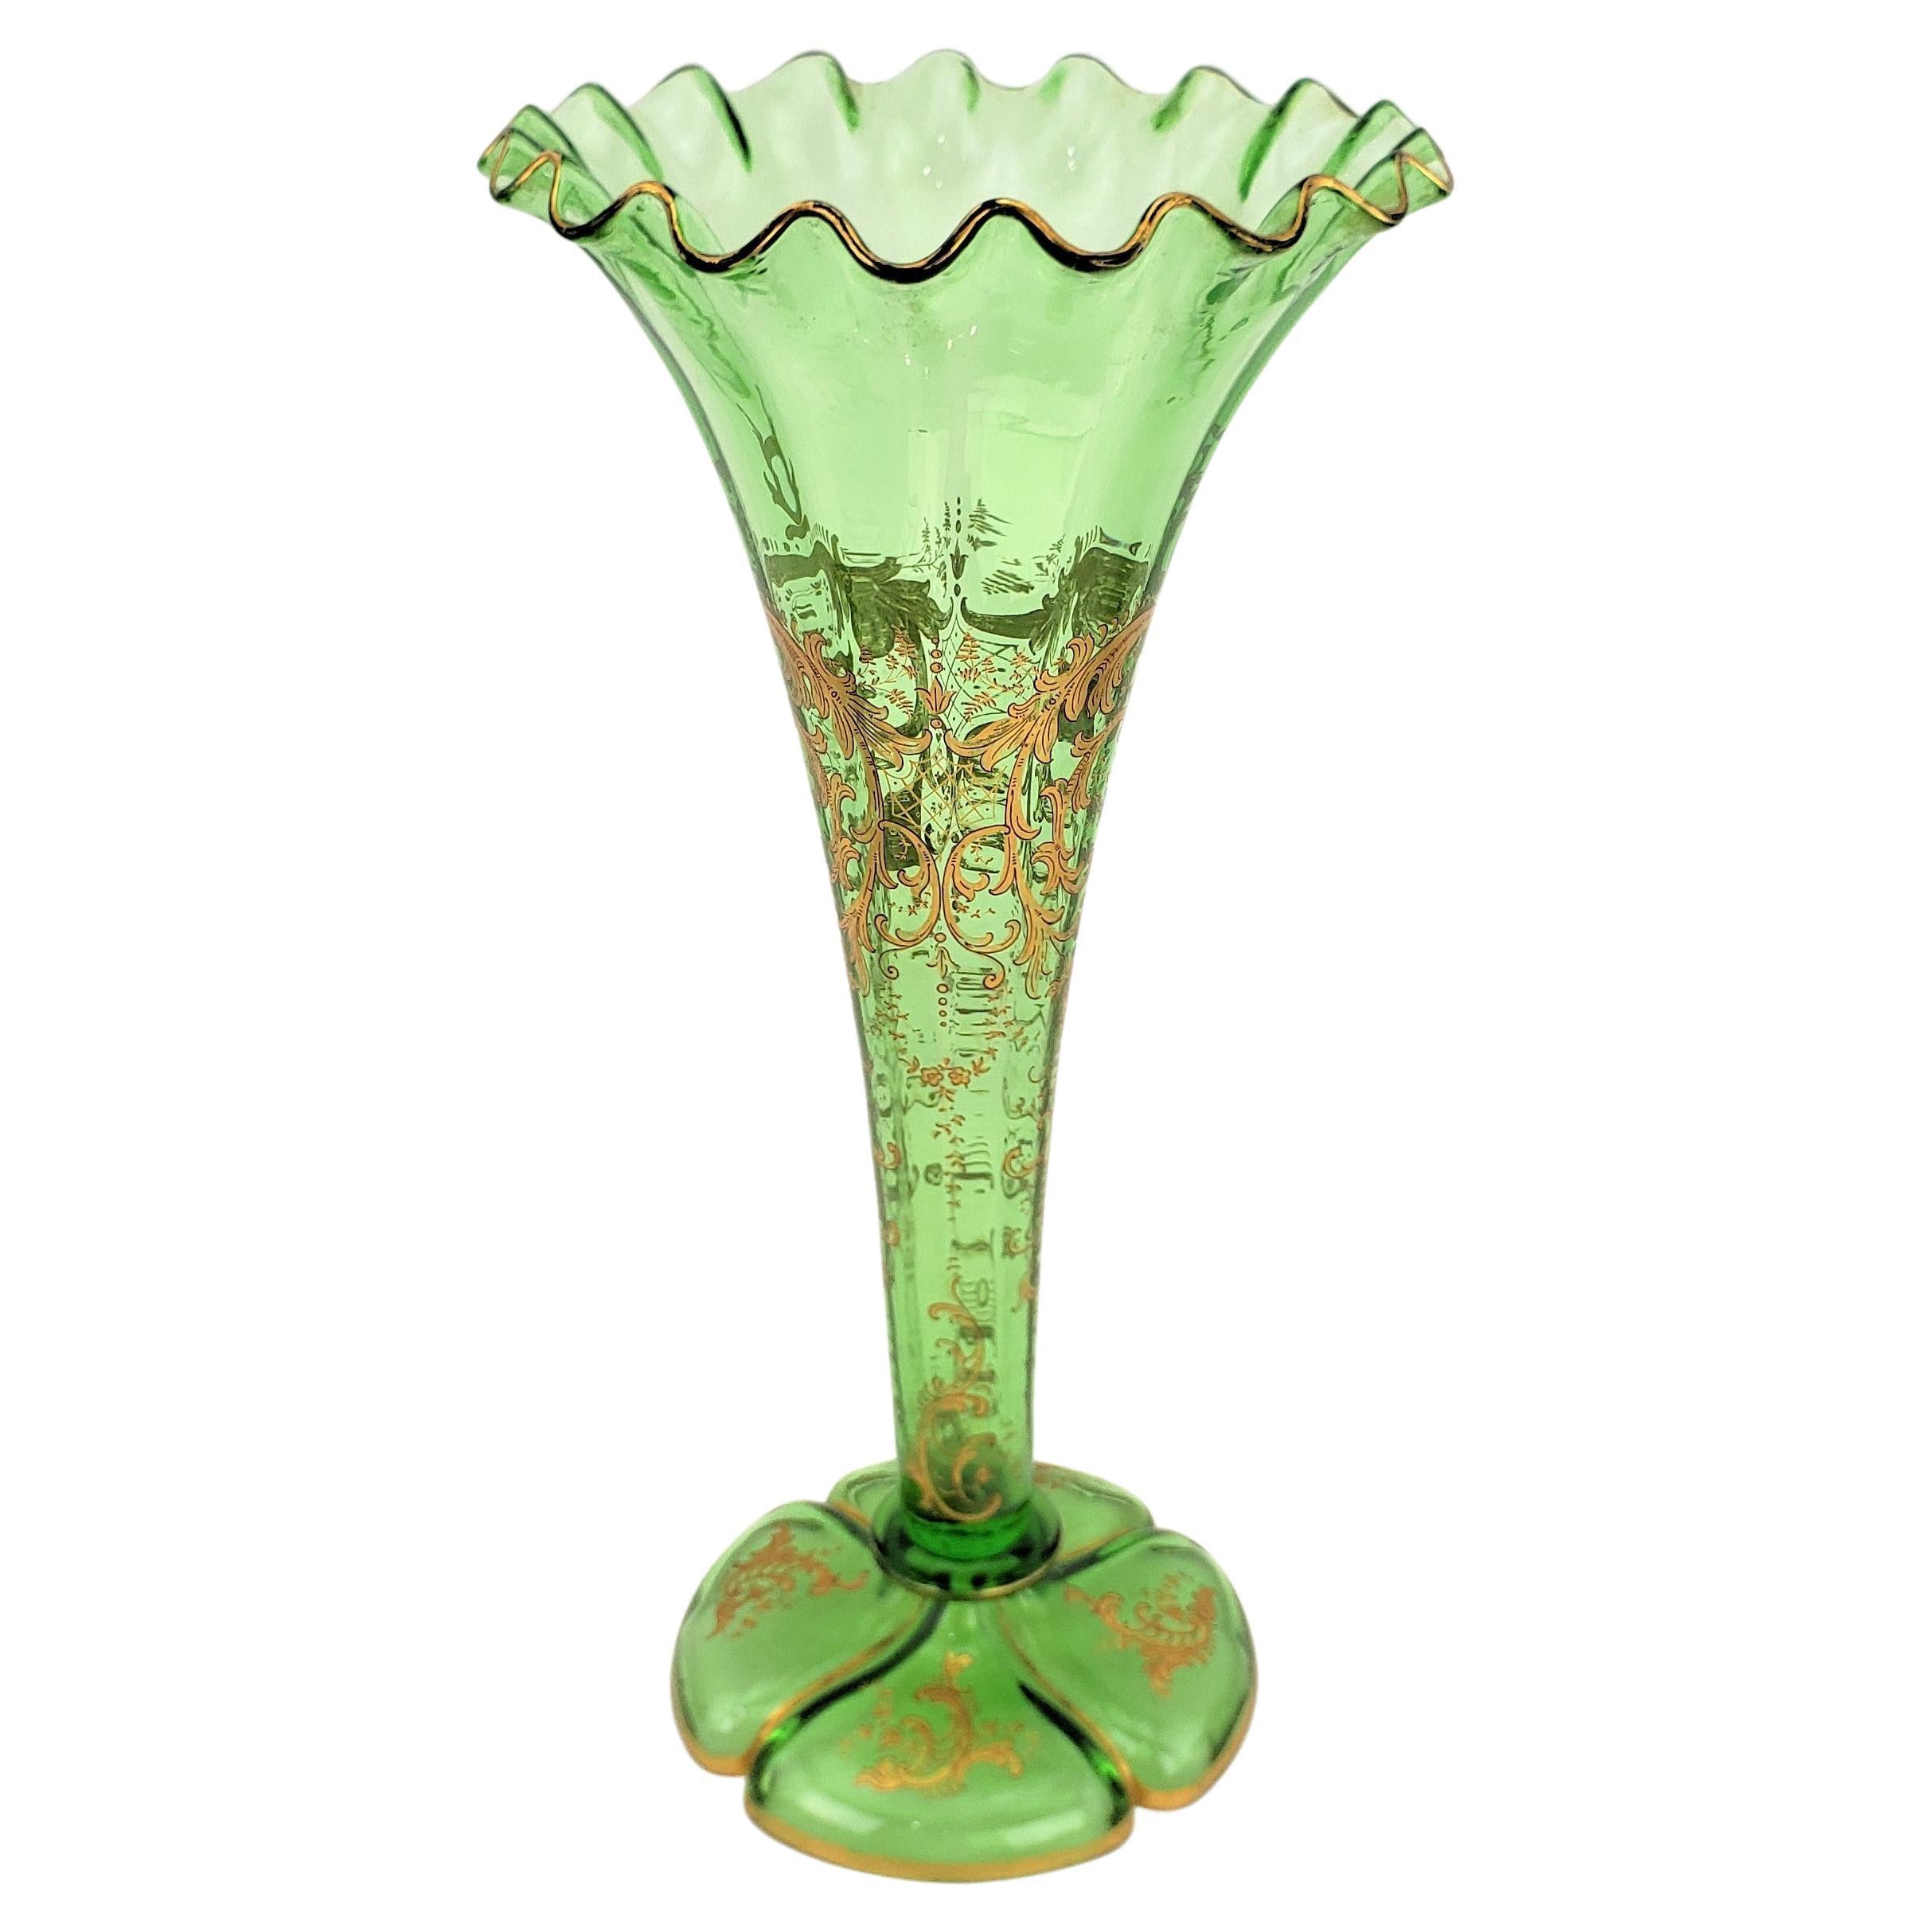 Large Antique Hand-Crafted Green Glass Trumpet Vase with Gilt Scroll Decoration